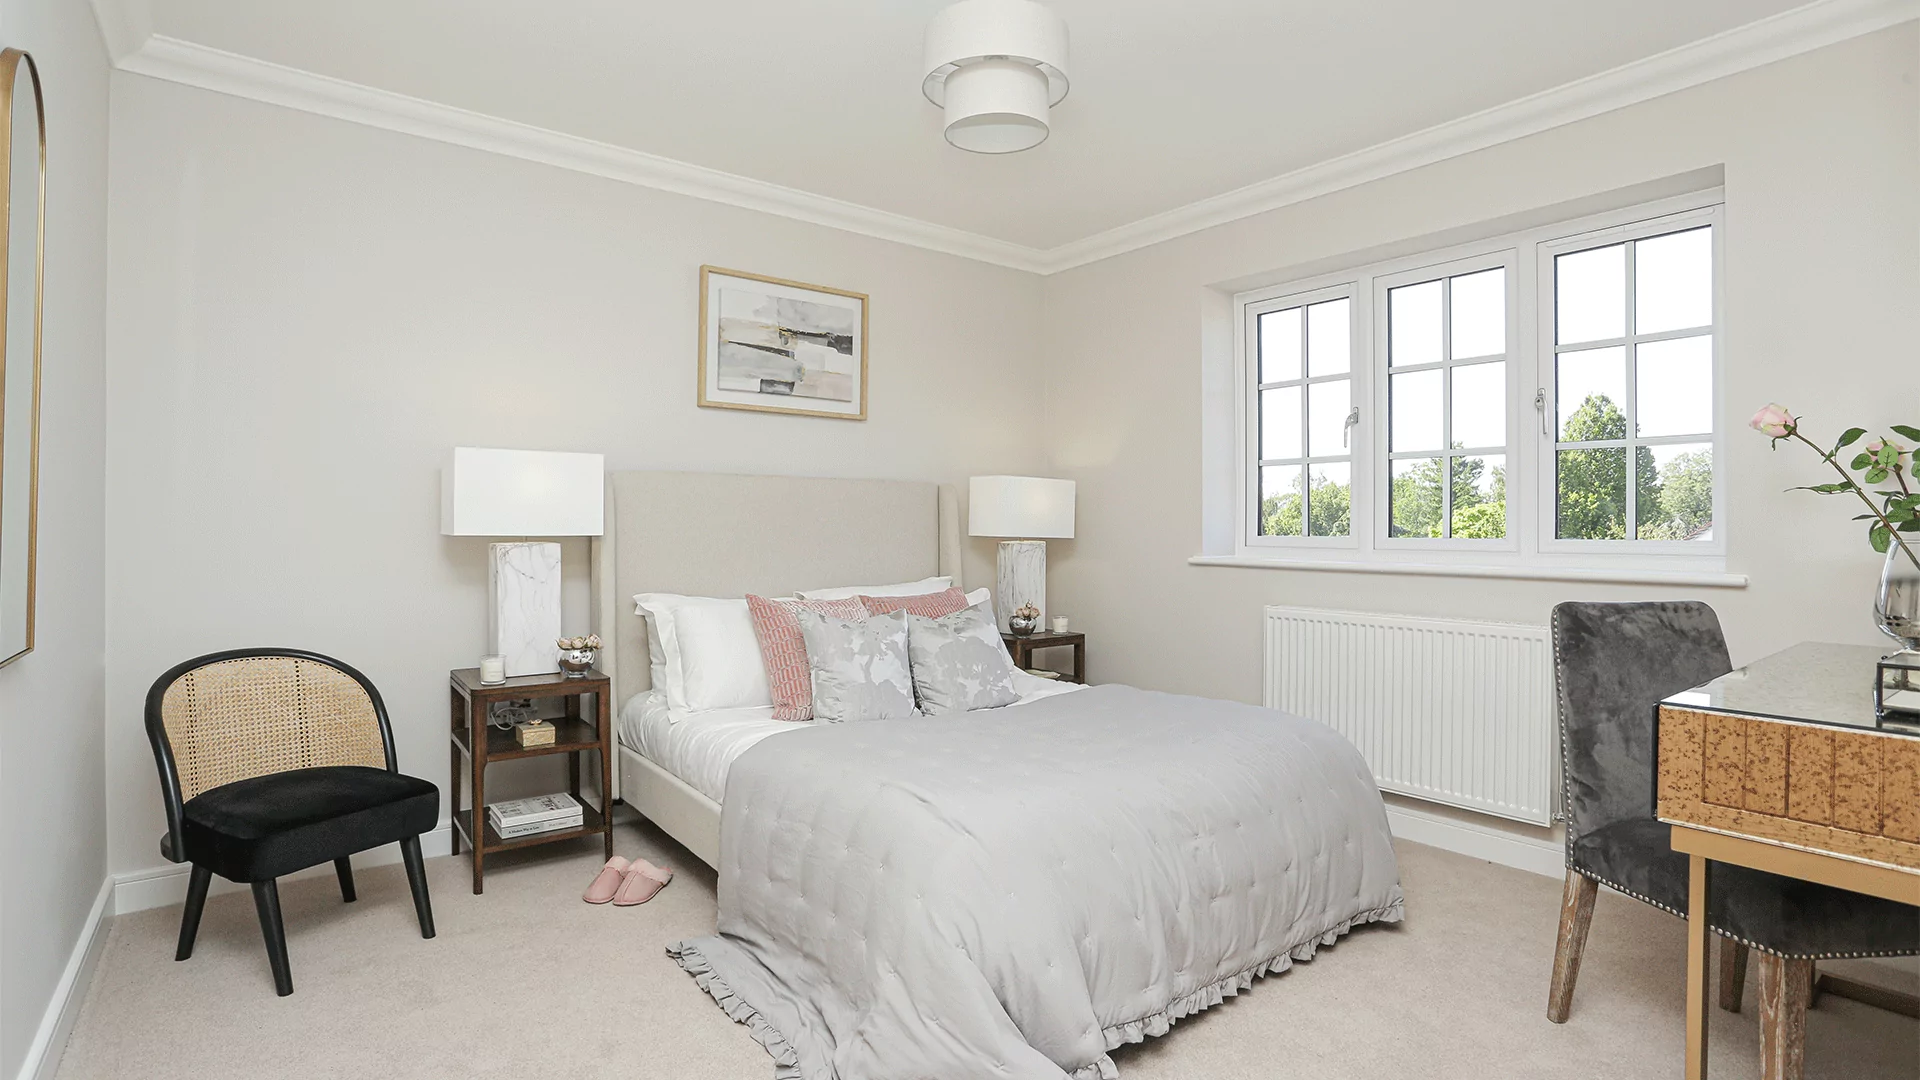 Master bedroom at Millers Meadow plot 8, wide angle including bed, windows, beside tables, chair and lamps